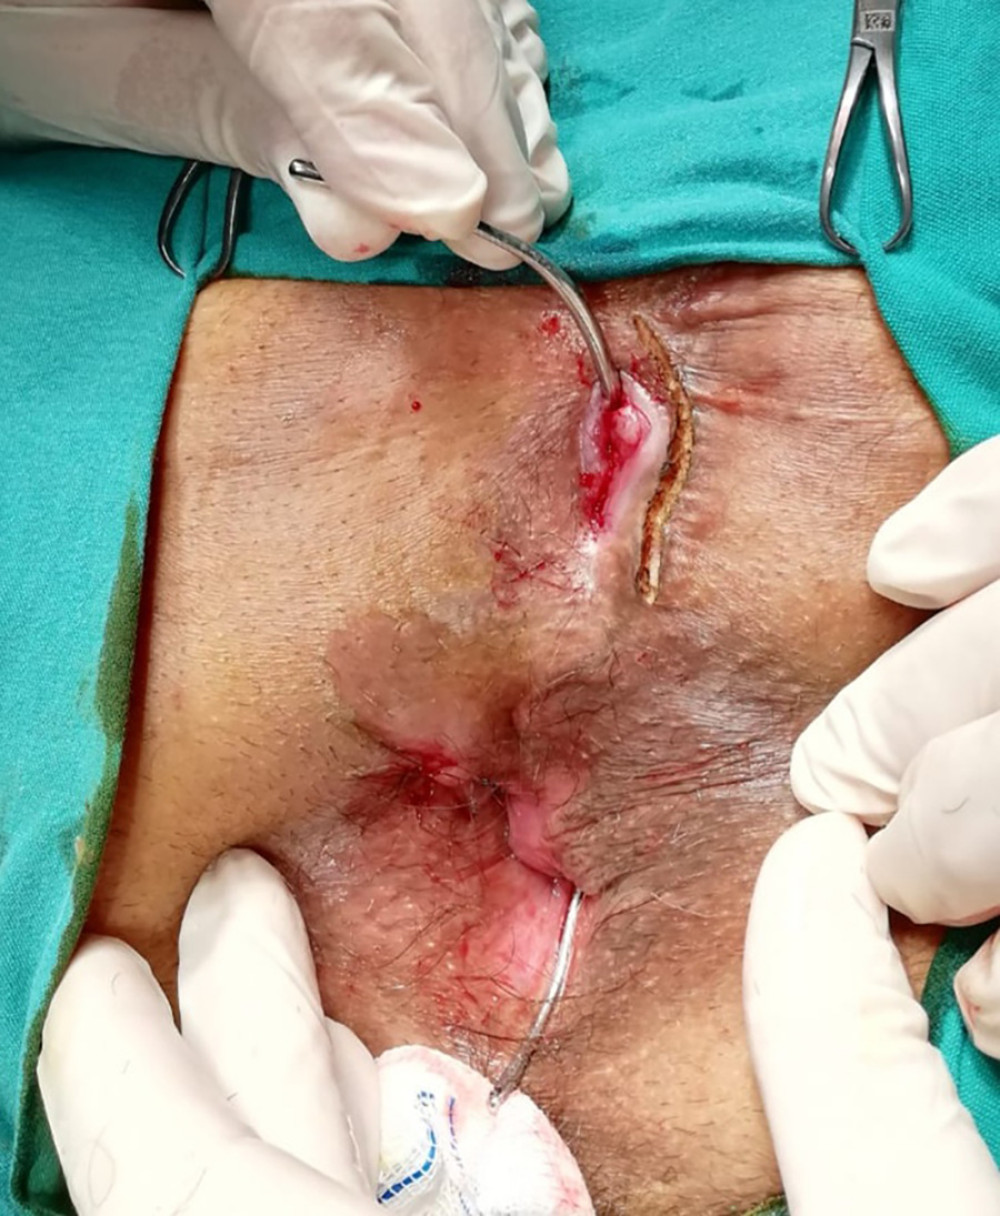 Transsphincteric perianal fistula in a human immunodeficiency virus (HIV)-positive patient. The patient underwent a partial fistulotomy and seton procedure.